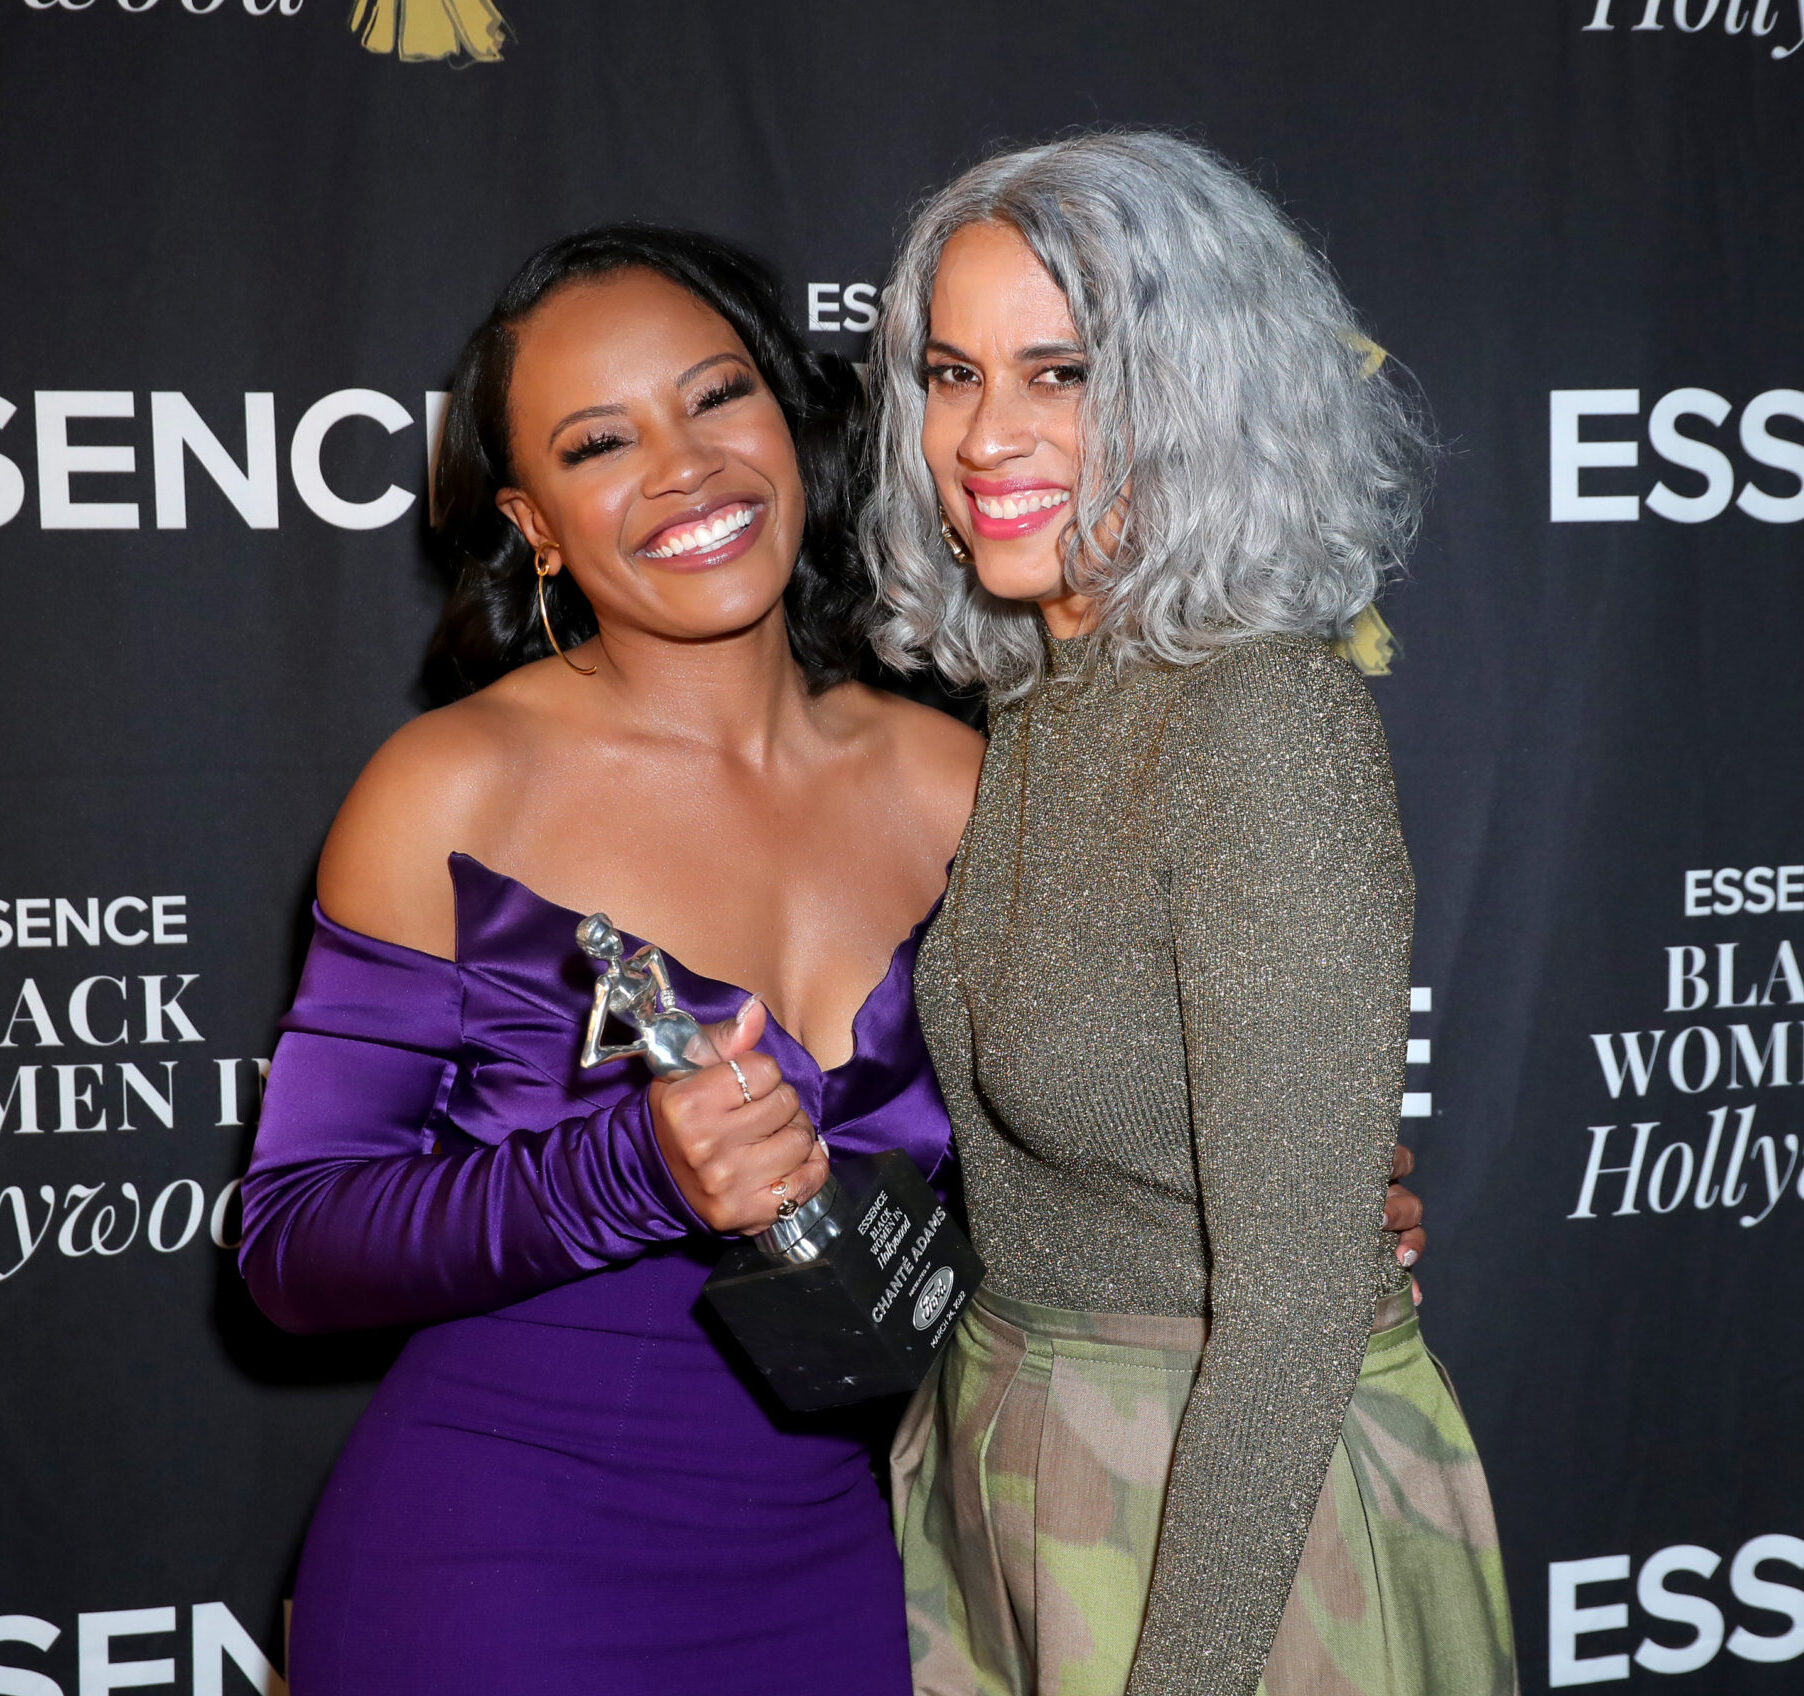 We Gave Our Stars Their Flowers During ESSENCE Black Women In Hollywood